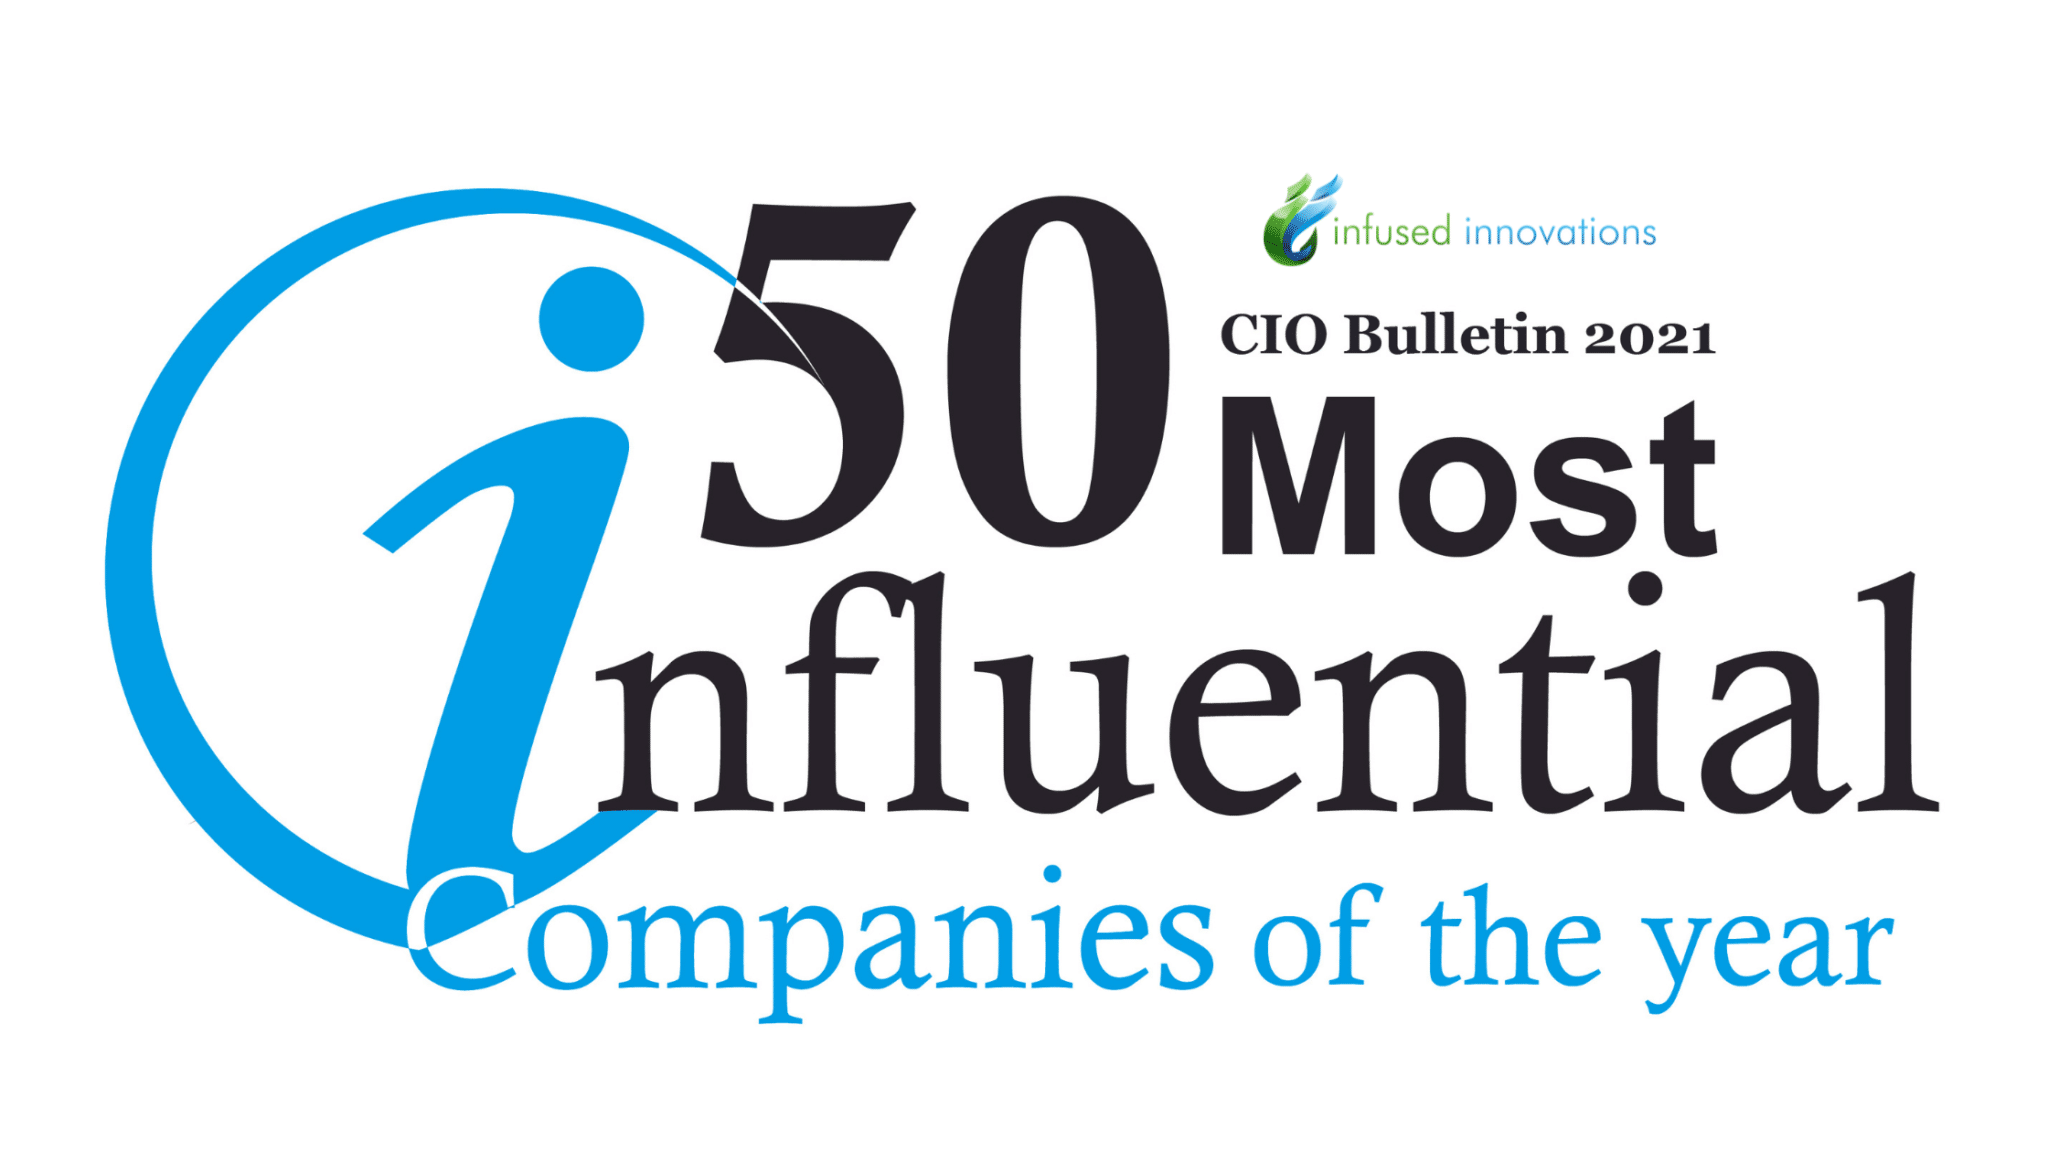 CIO Bulletin Recognizes Infused Innovations in Top 50 Most Influential Companies of the Year 2021 9